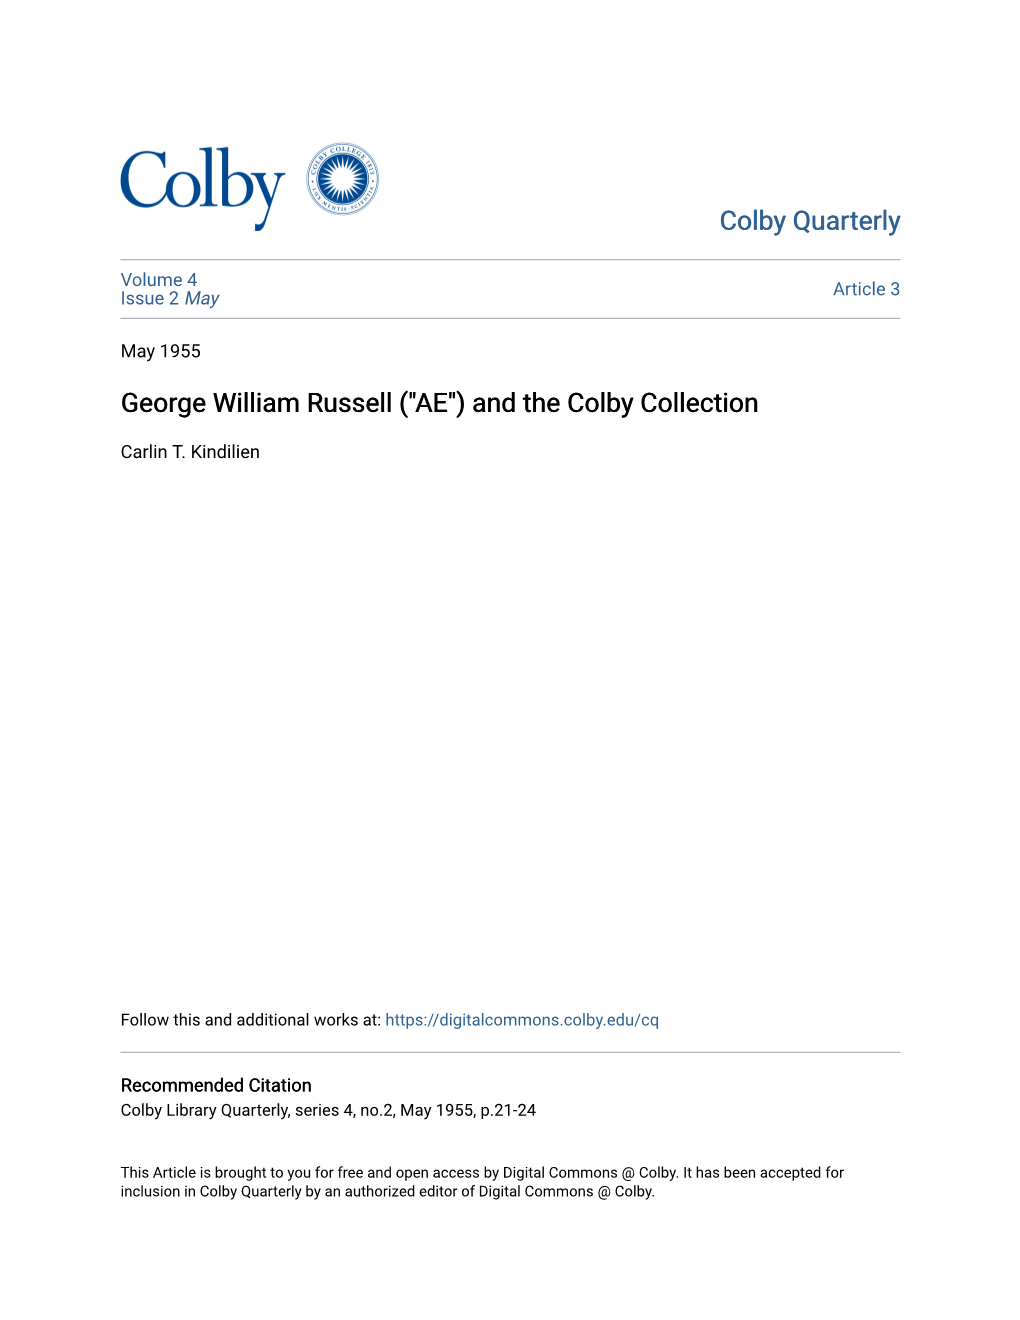 George William Russell ("AE") and the Colby Collection